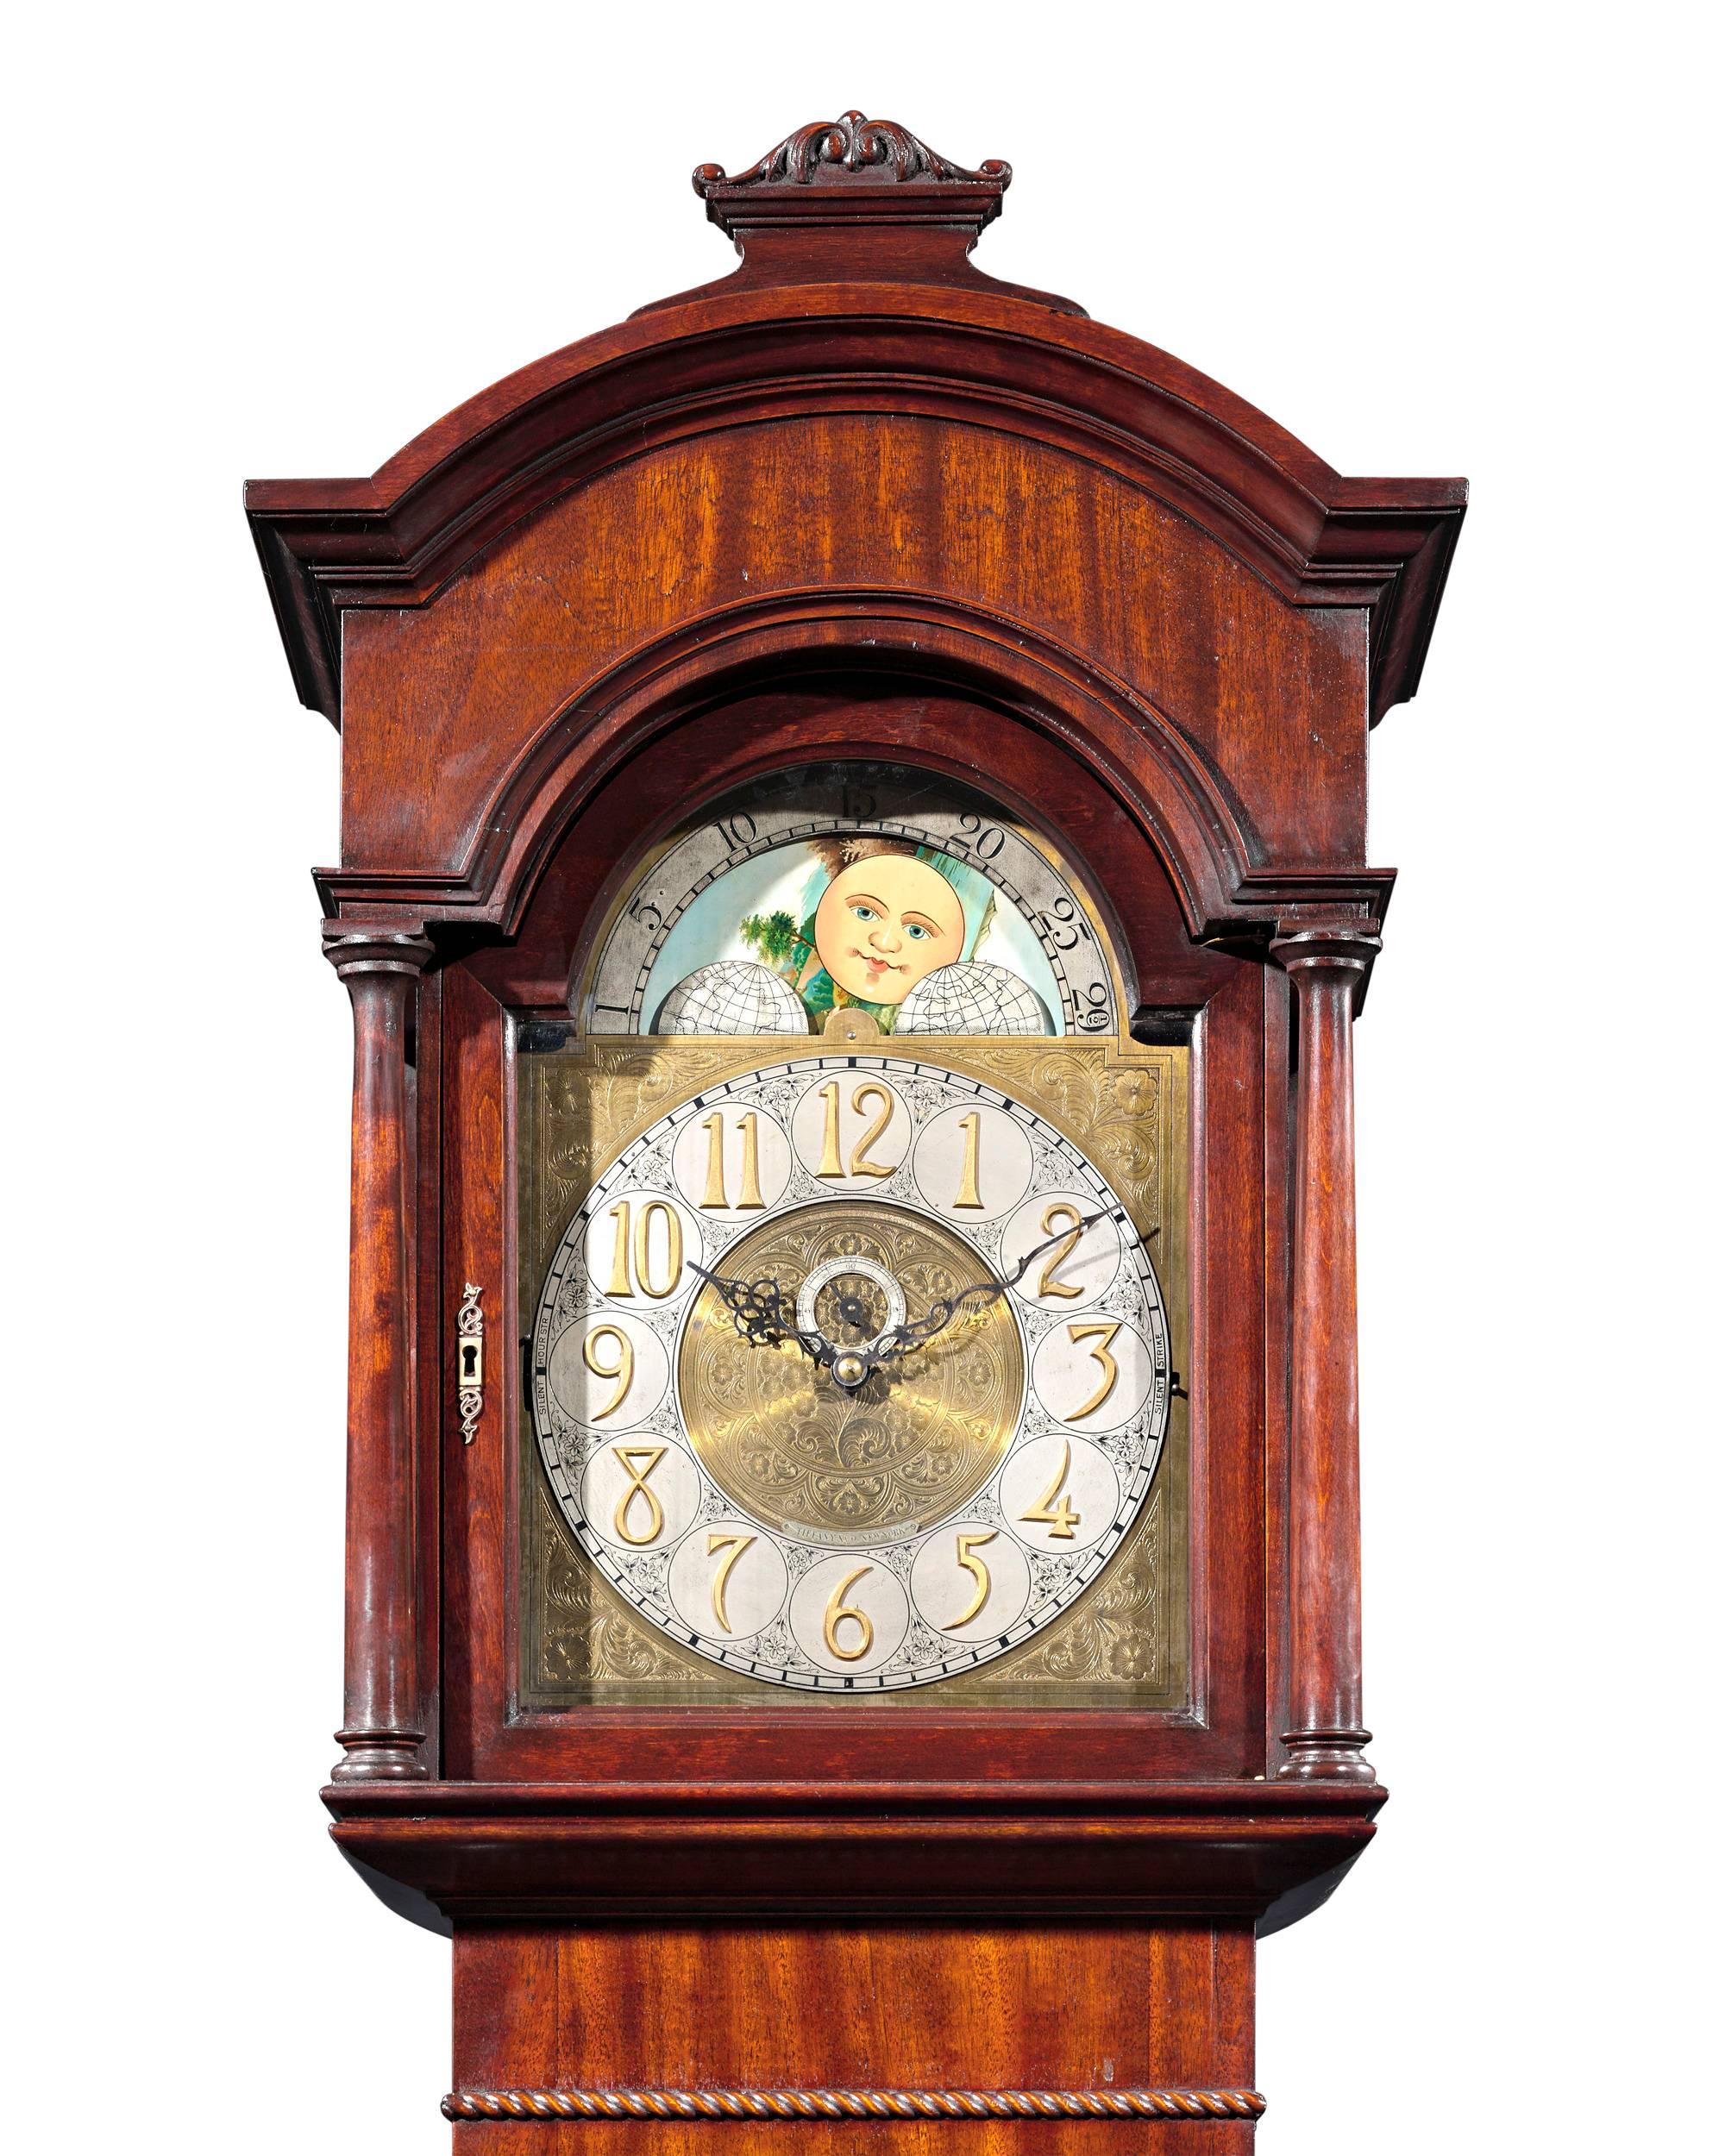 An incredible example of American clock making, this chiming grandfather clock was retailed by Tiffany & Co. of New York. Impressive in its construction, this exceptional timepiece keeps accurate time thanks to three brass weights and a pendulum,